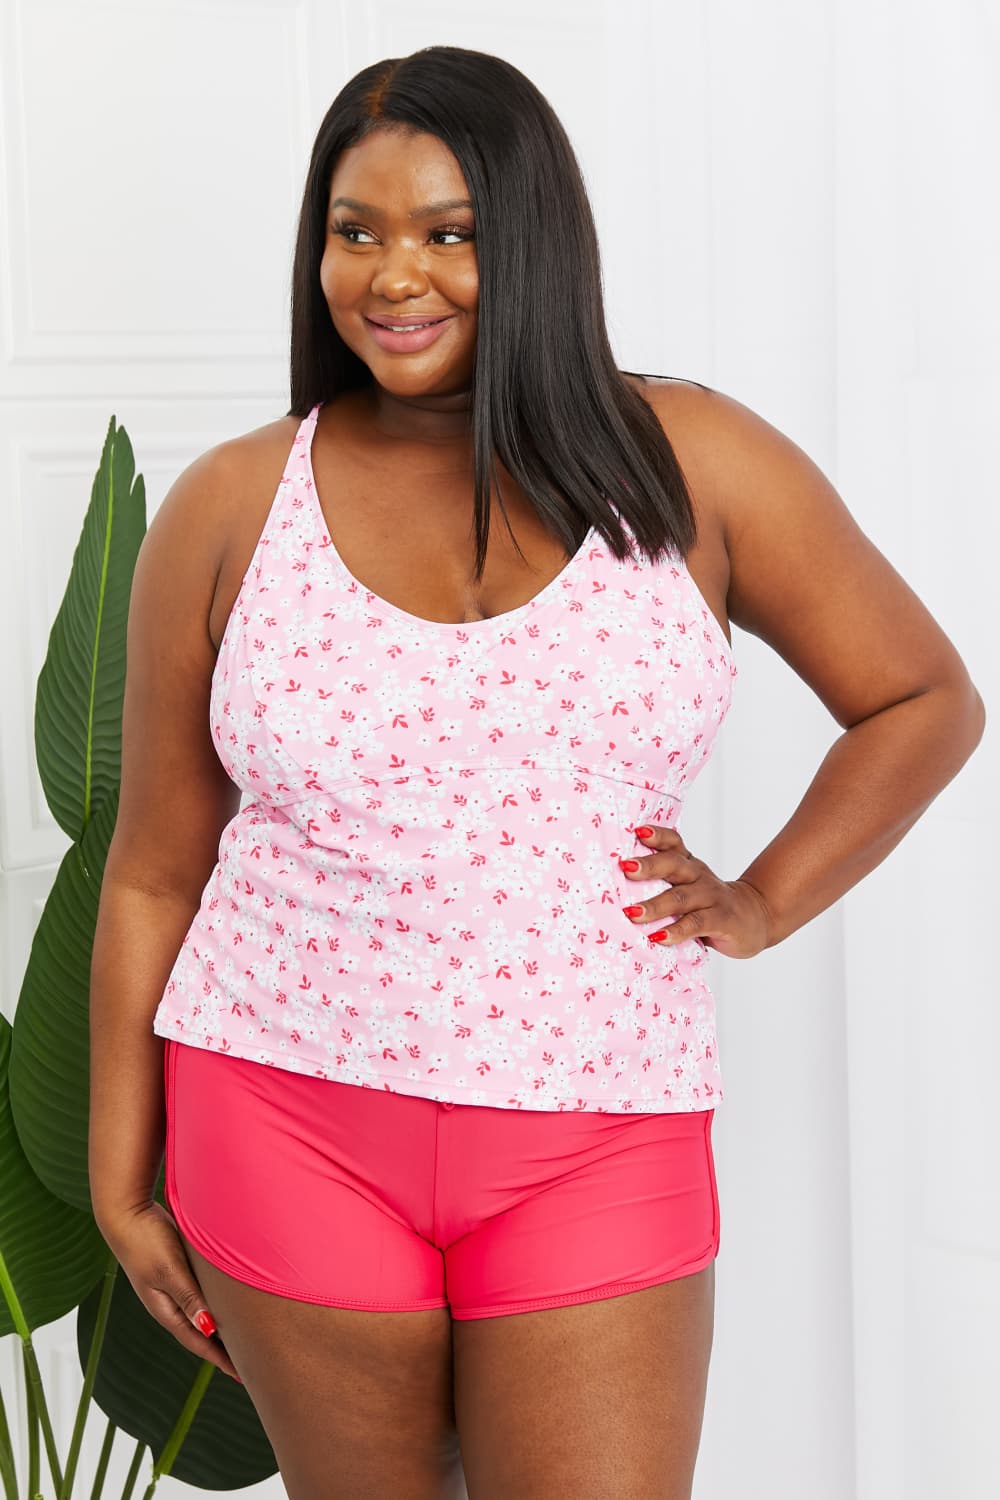 Marina West Swim By The Shore Plus Size Two-Piece Swimsuit in Blossom Pink  Sunset and Swim Floral XS 